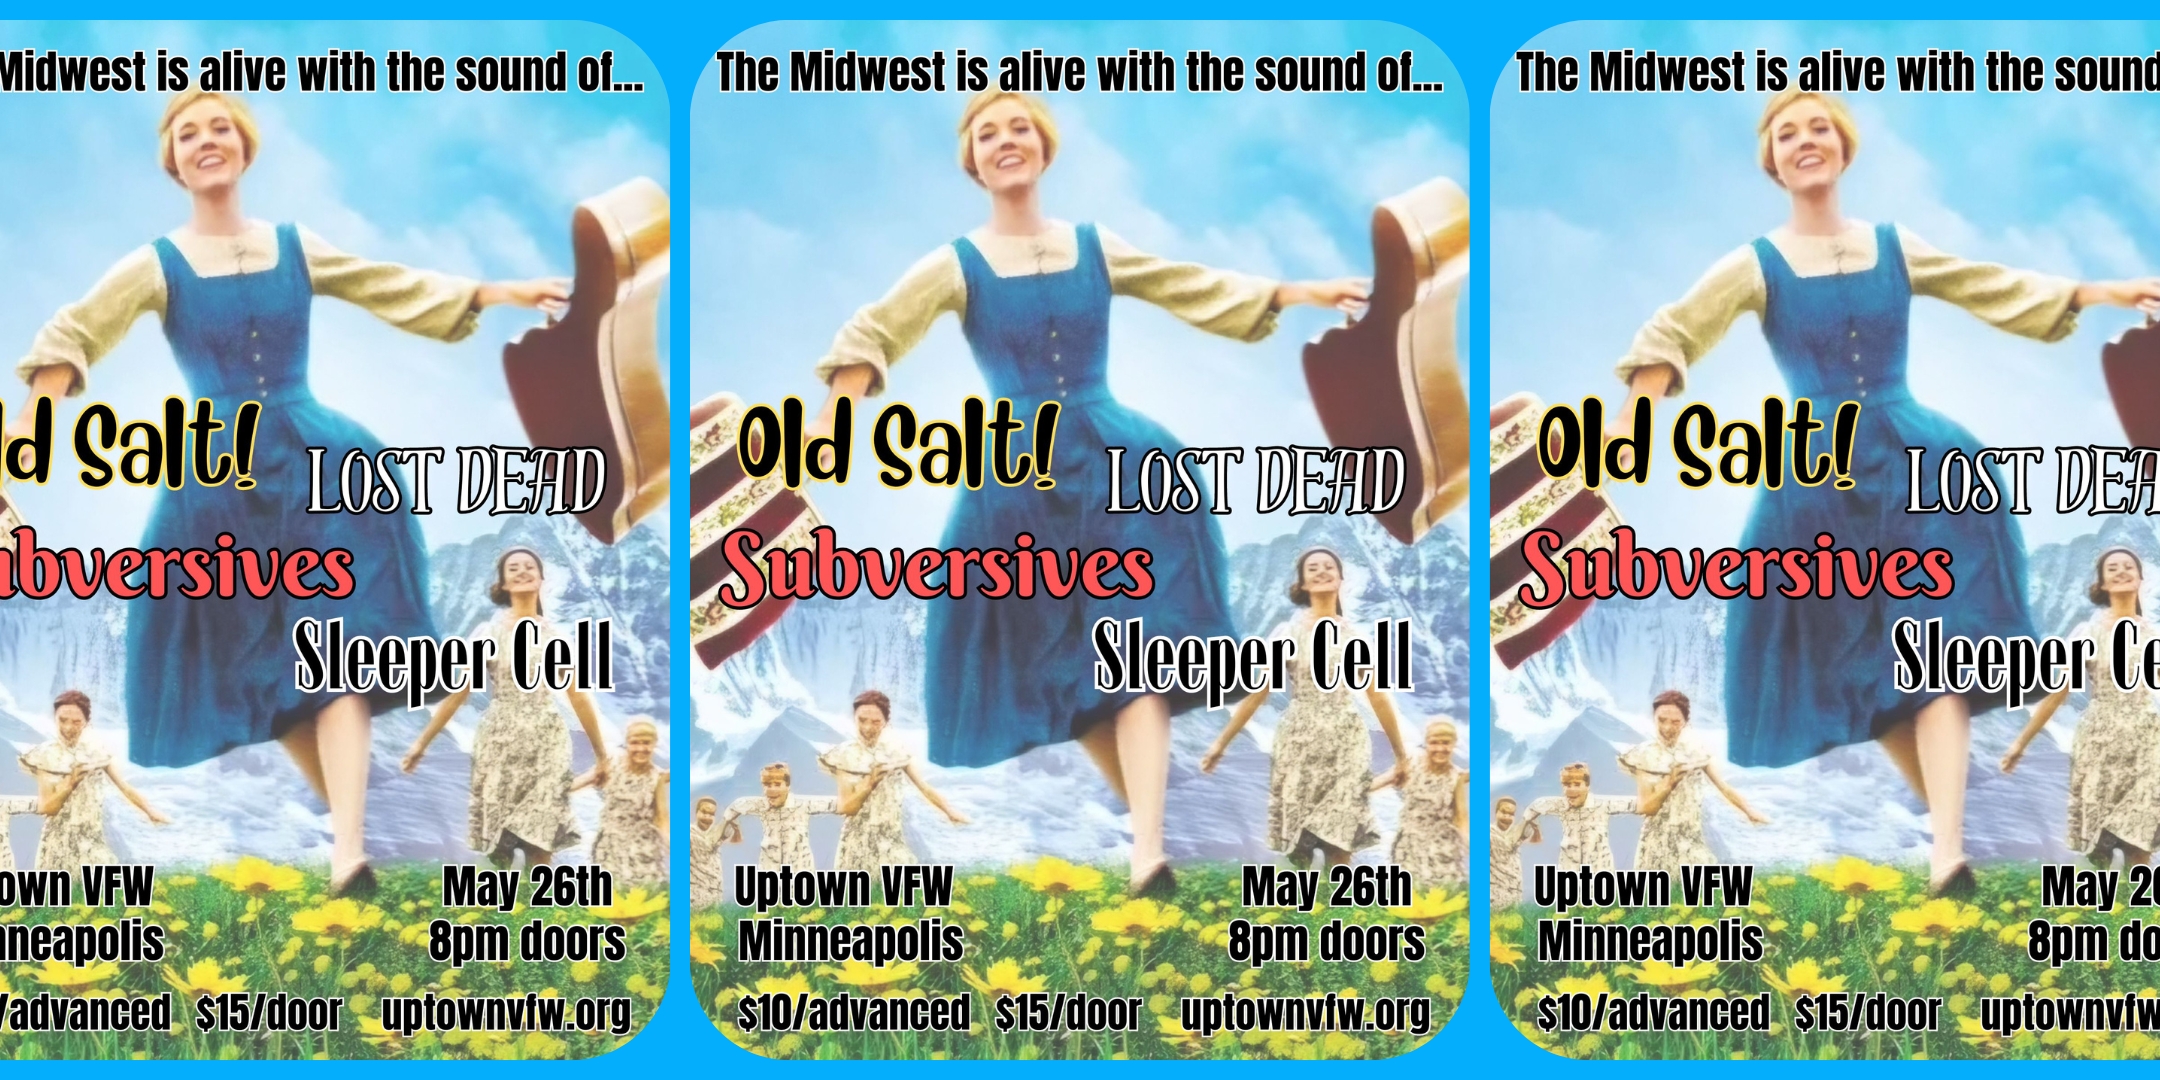 The Midwest is alive with the Sound of.. Old Salt! Lost Dead The Subversives Sleeper Cell Sunday, May 26 James Ballentine "Uptown" VFW Post 246 Doors 8:00pm :: Music 8:30pm :: 21+ General Admission: $10 ADV / $15 DOS Tickets On Sale Now